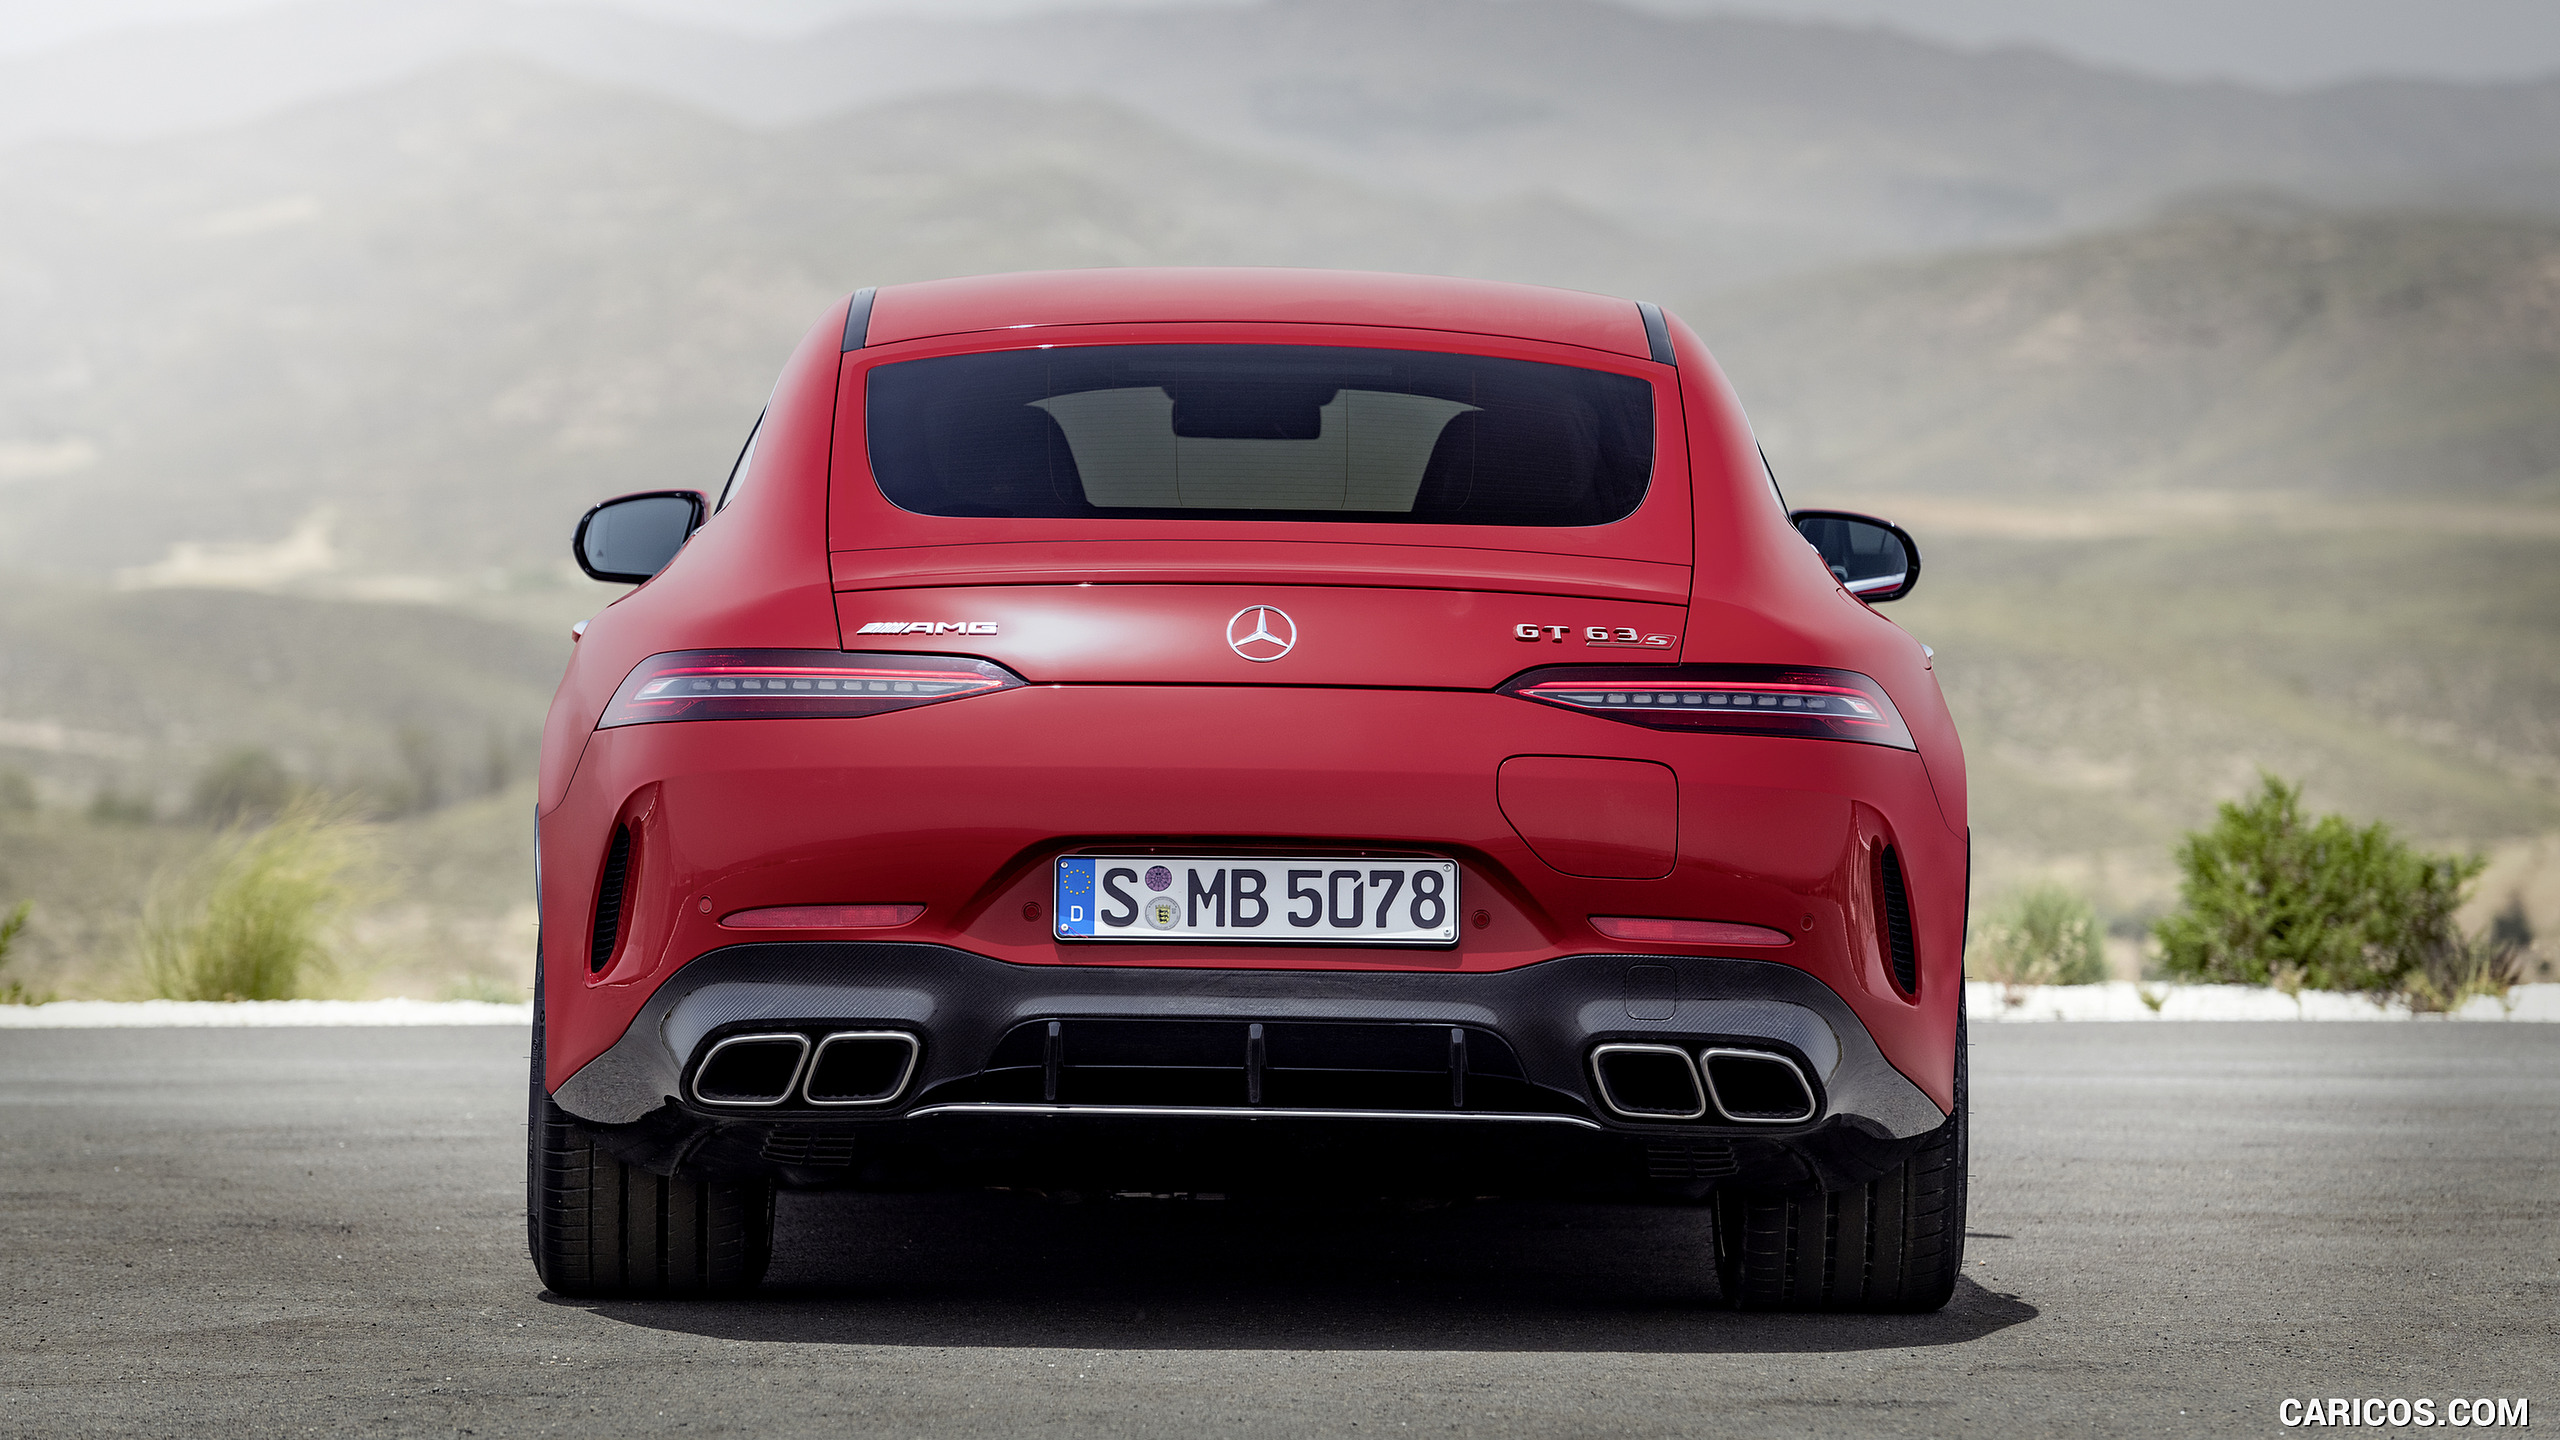 2022 Mercedes-AMG GT 63 S E Performance 4MATIC+ (Color: Jupiter Red) - Rear, #20 of 88